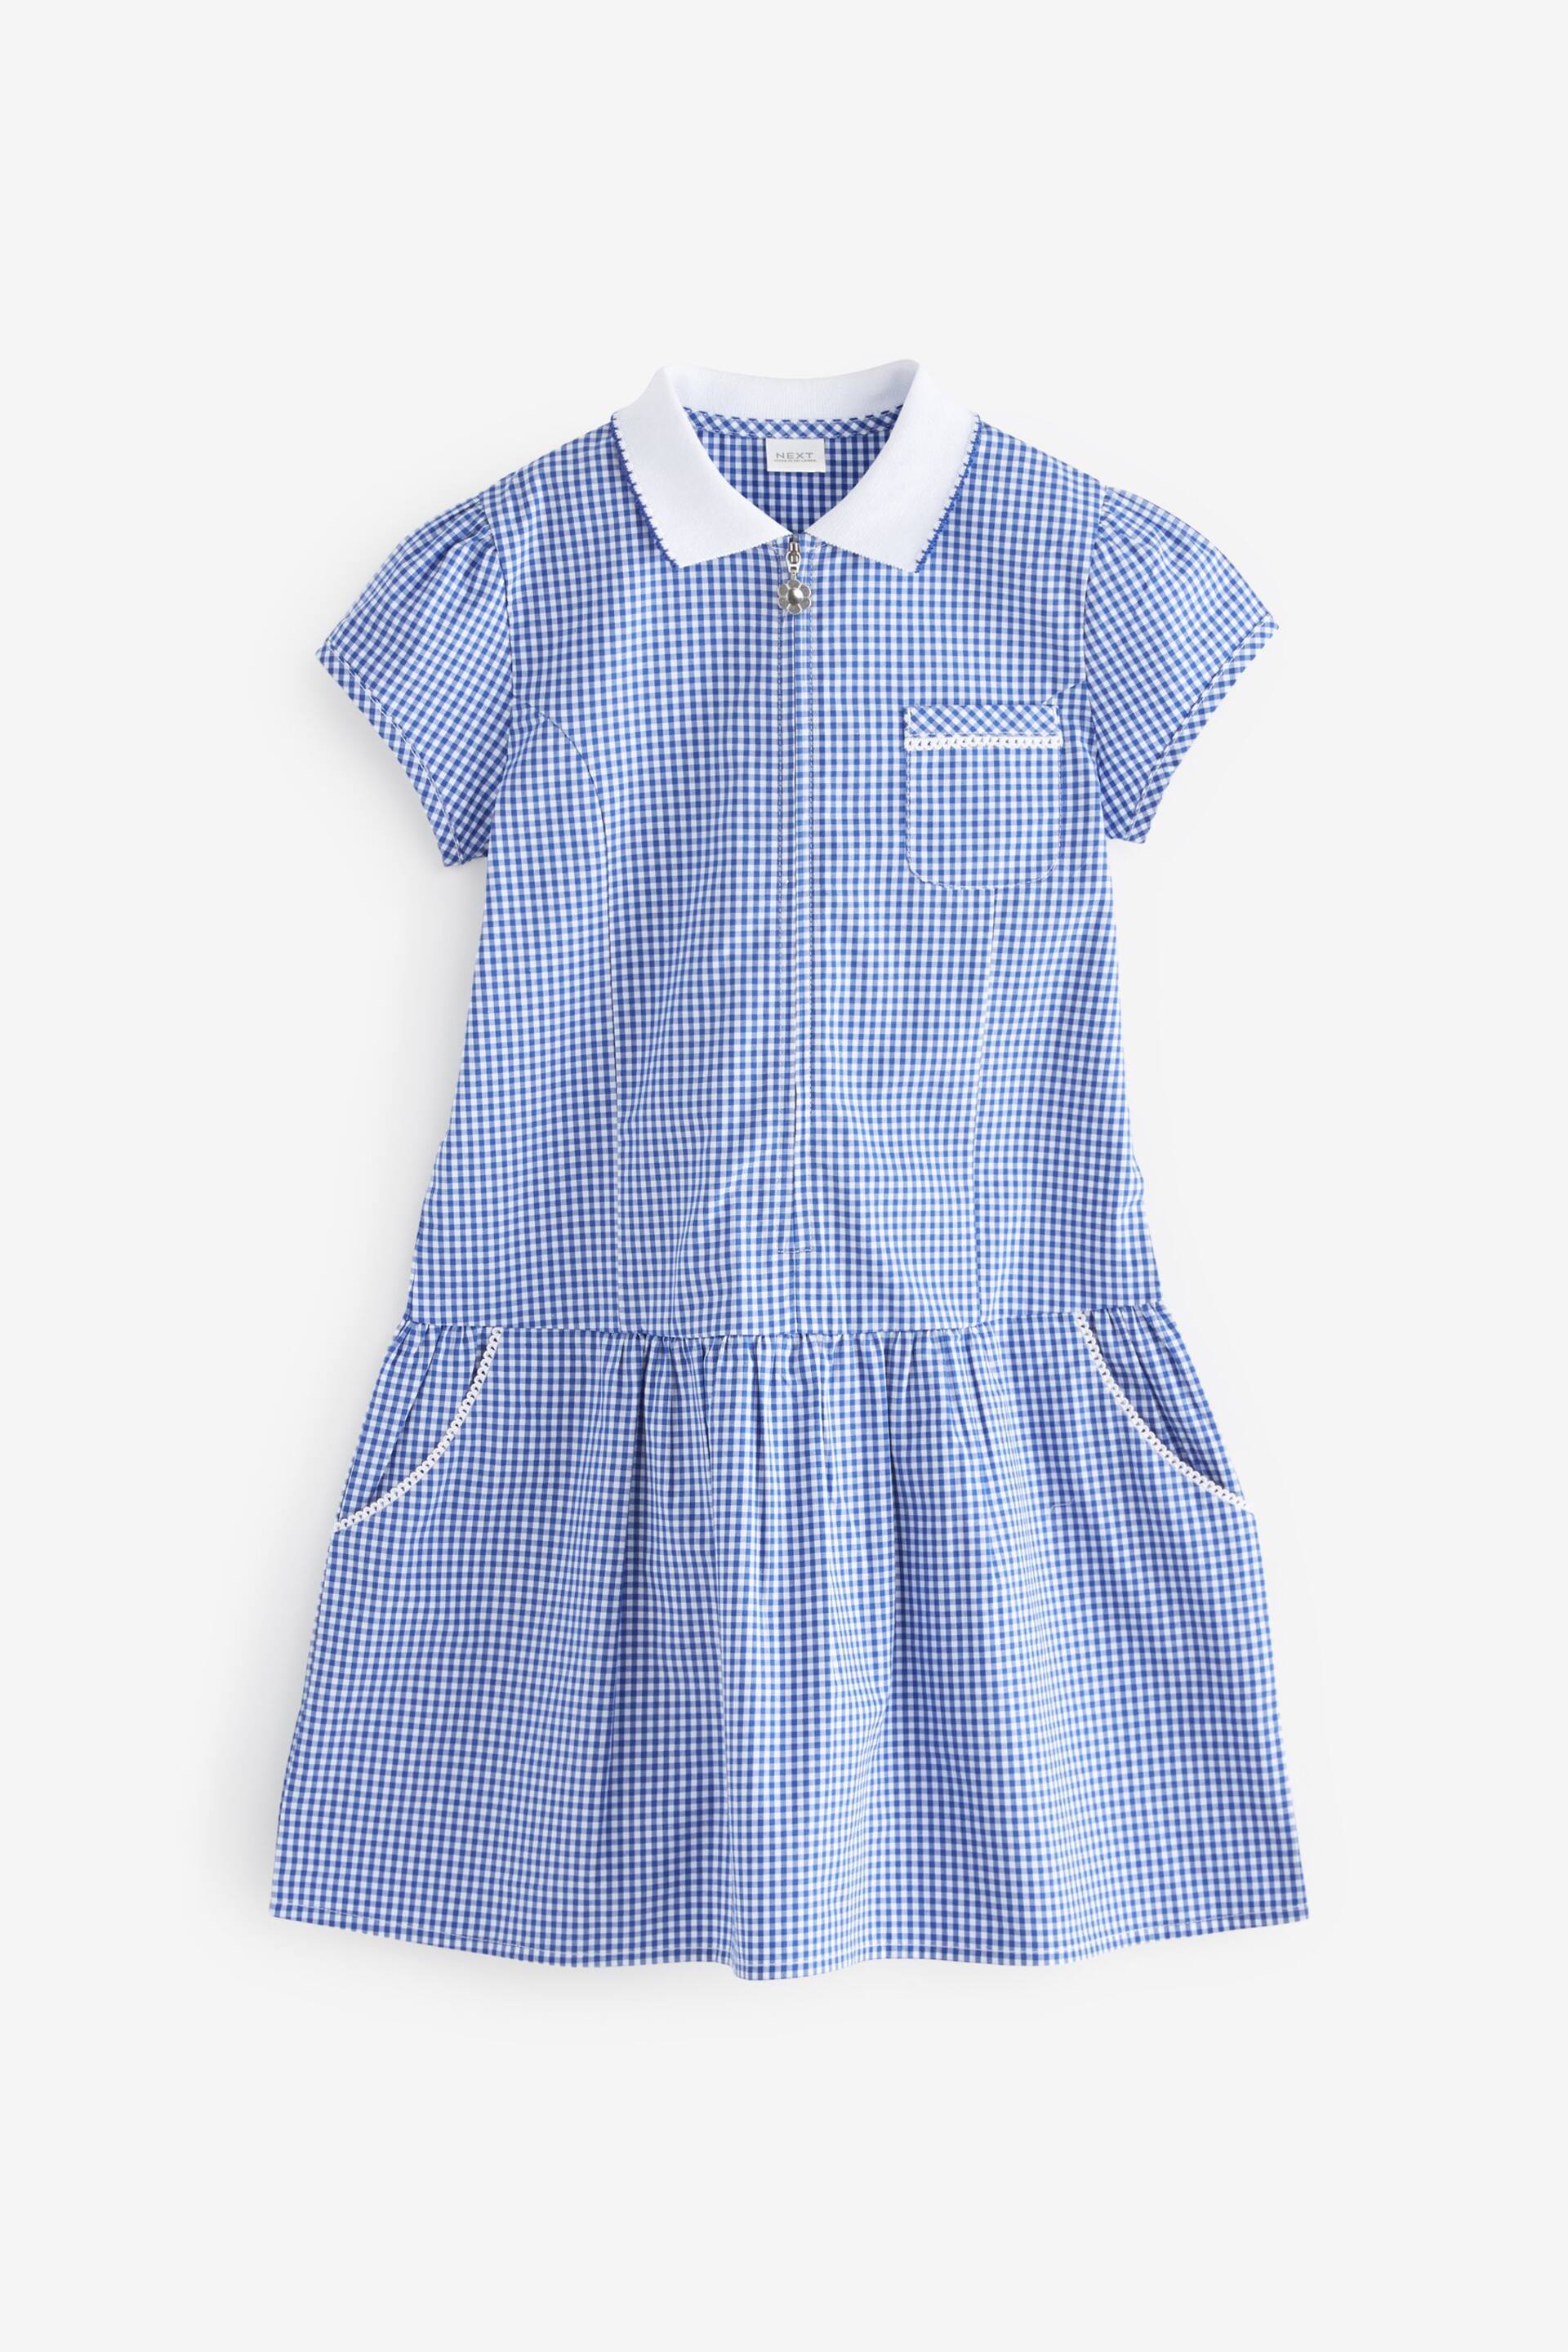 Mid Blue Cotton Rich School Gingham Zip Dress (3-14yrs) - Image 5 of 7